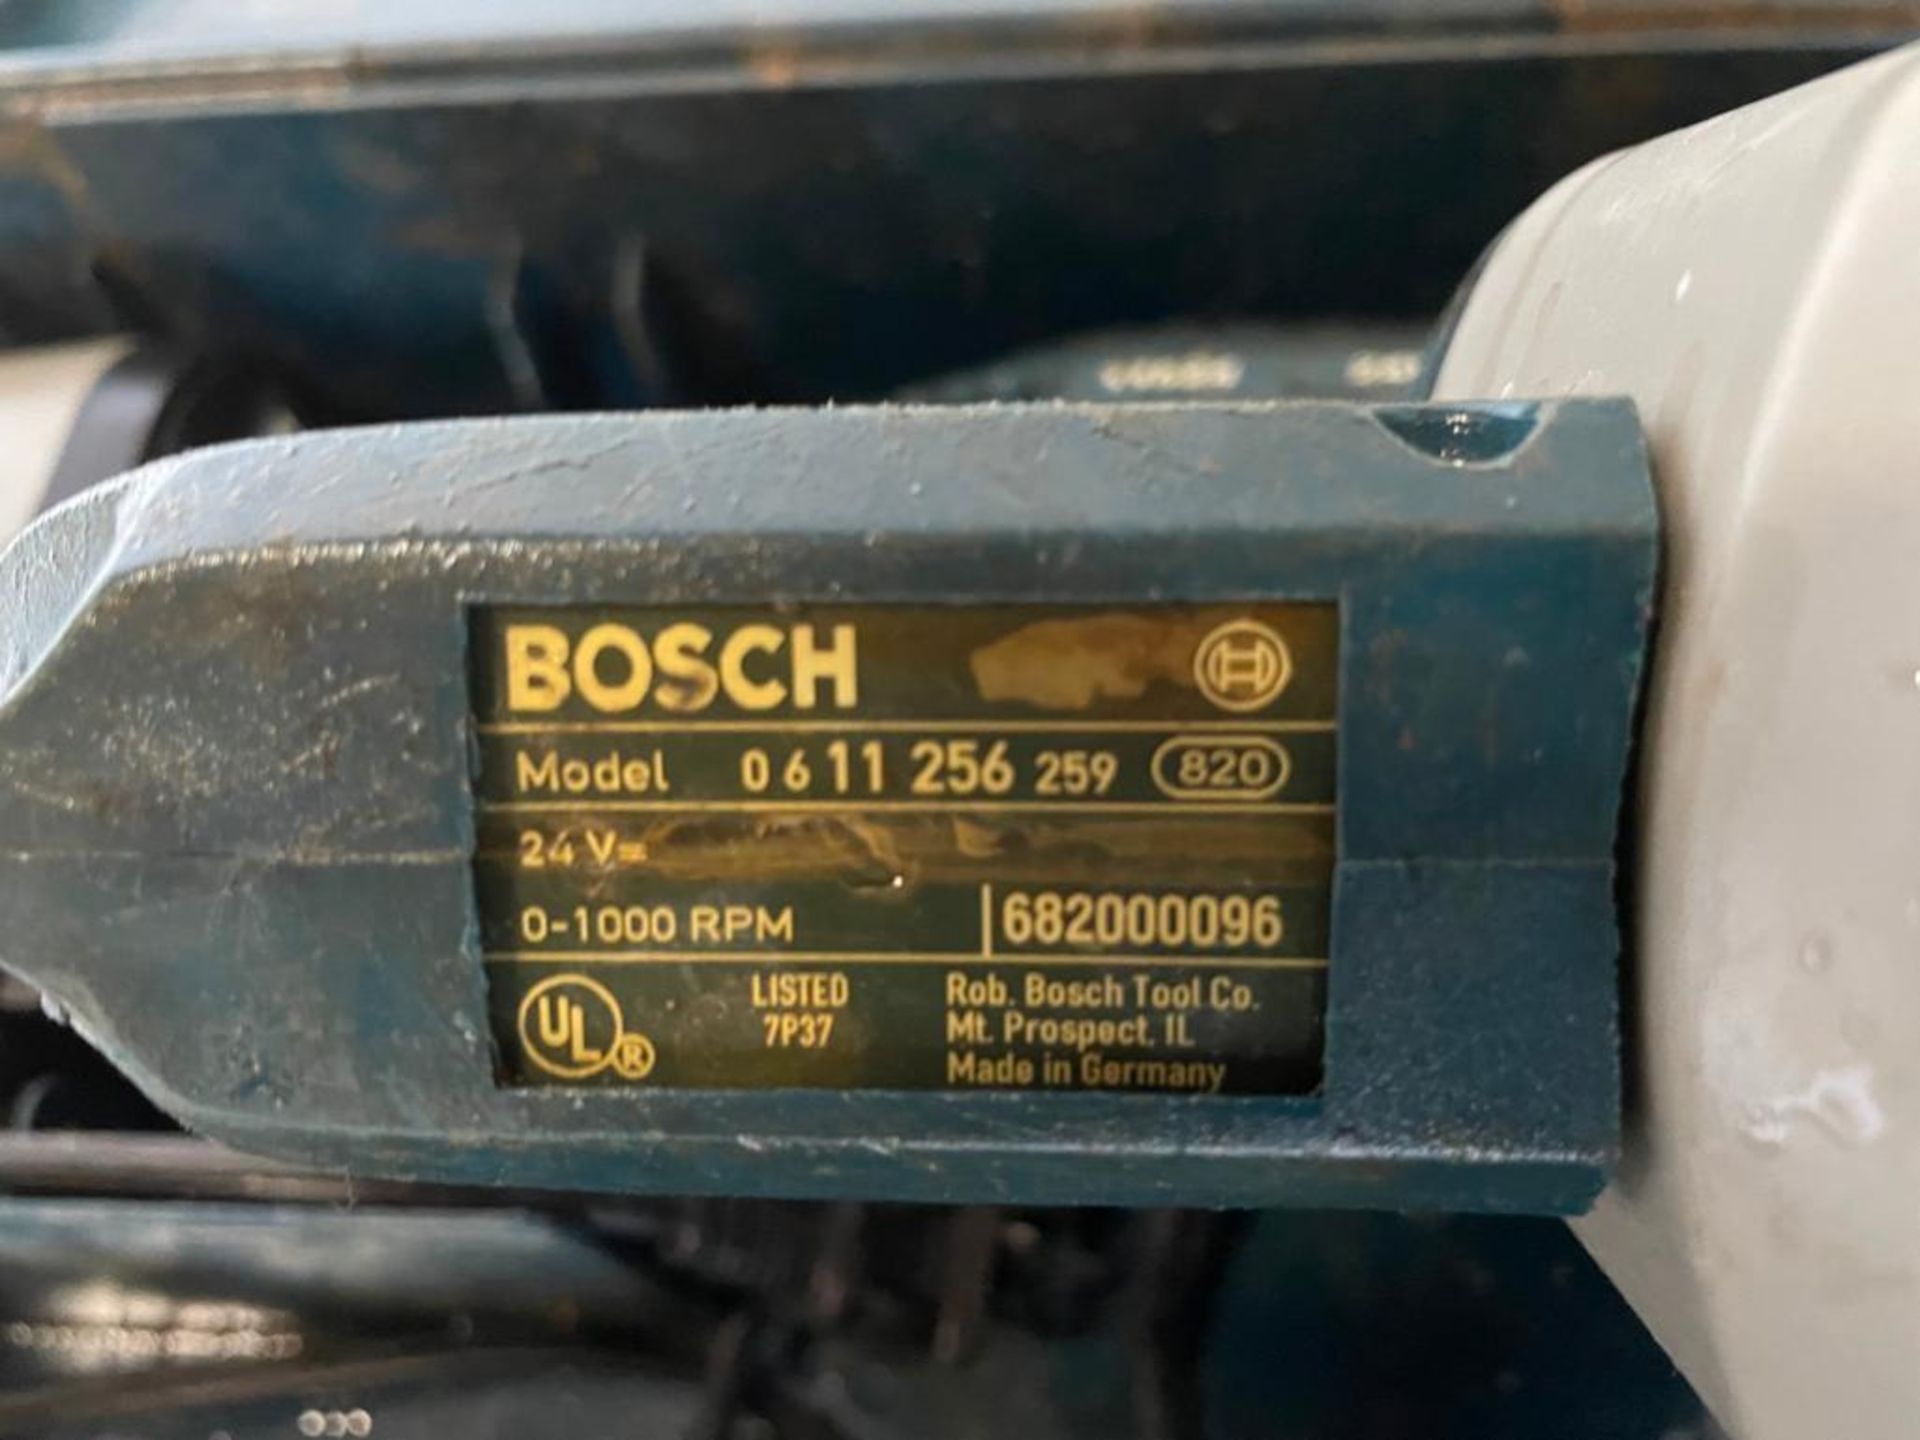 Bosch 11524 Rotary Hammer, 24V. Located in Hazelwood, MO - Image 5 of 9